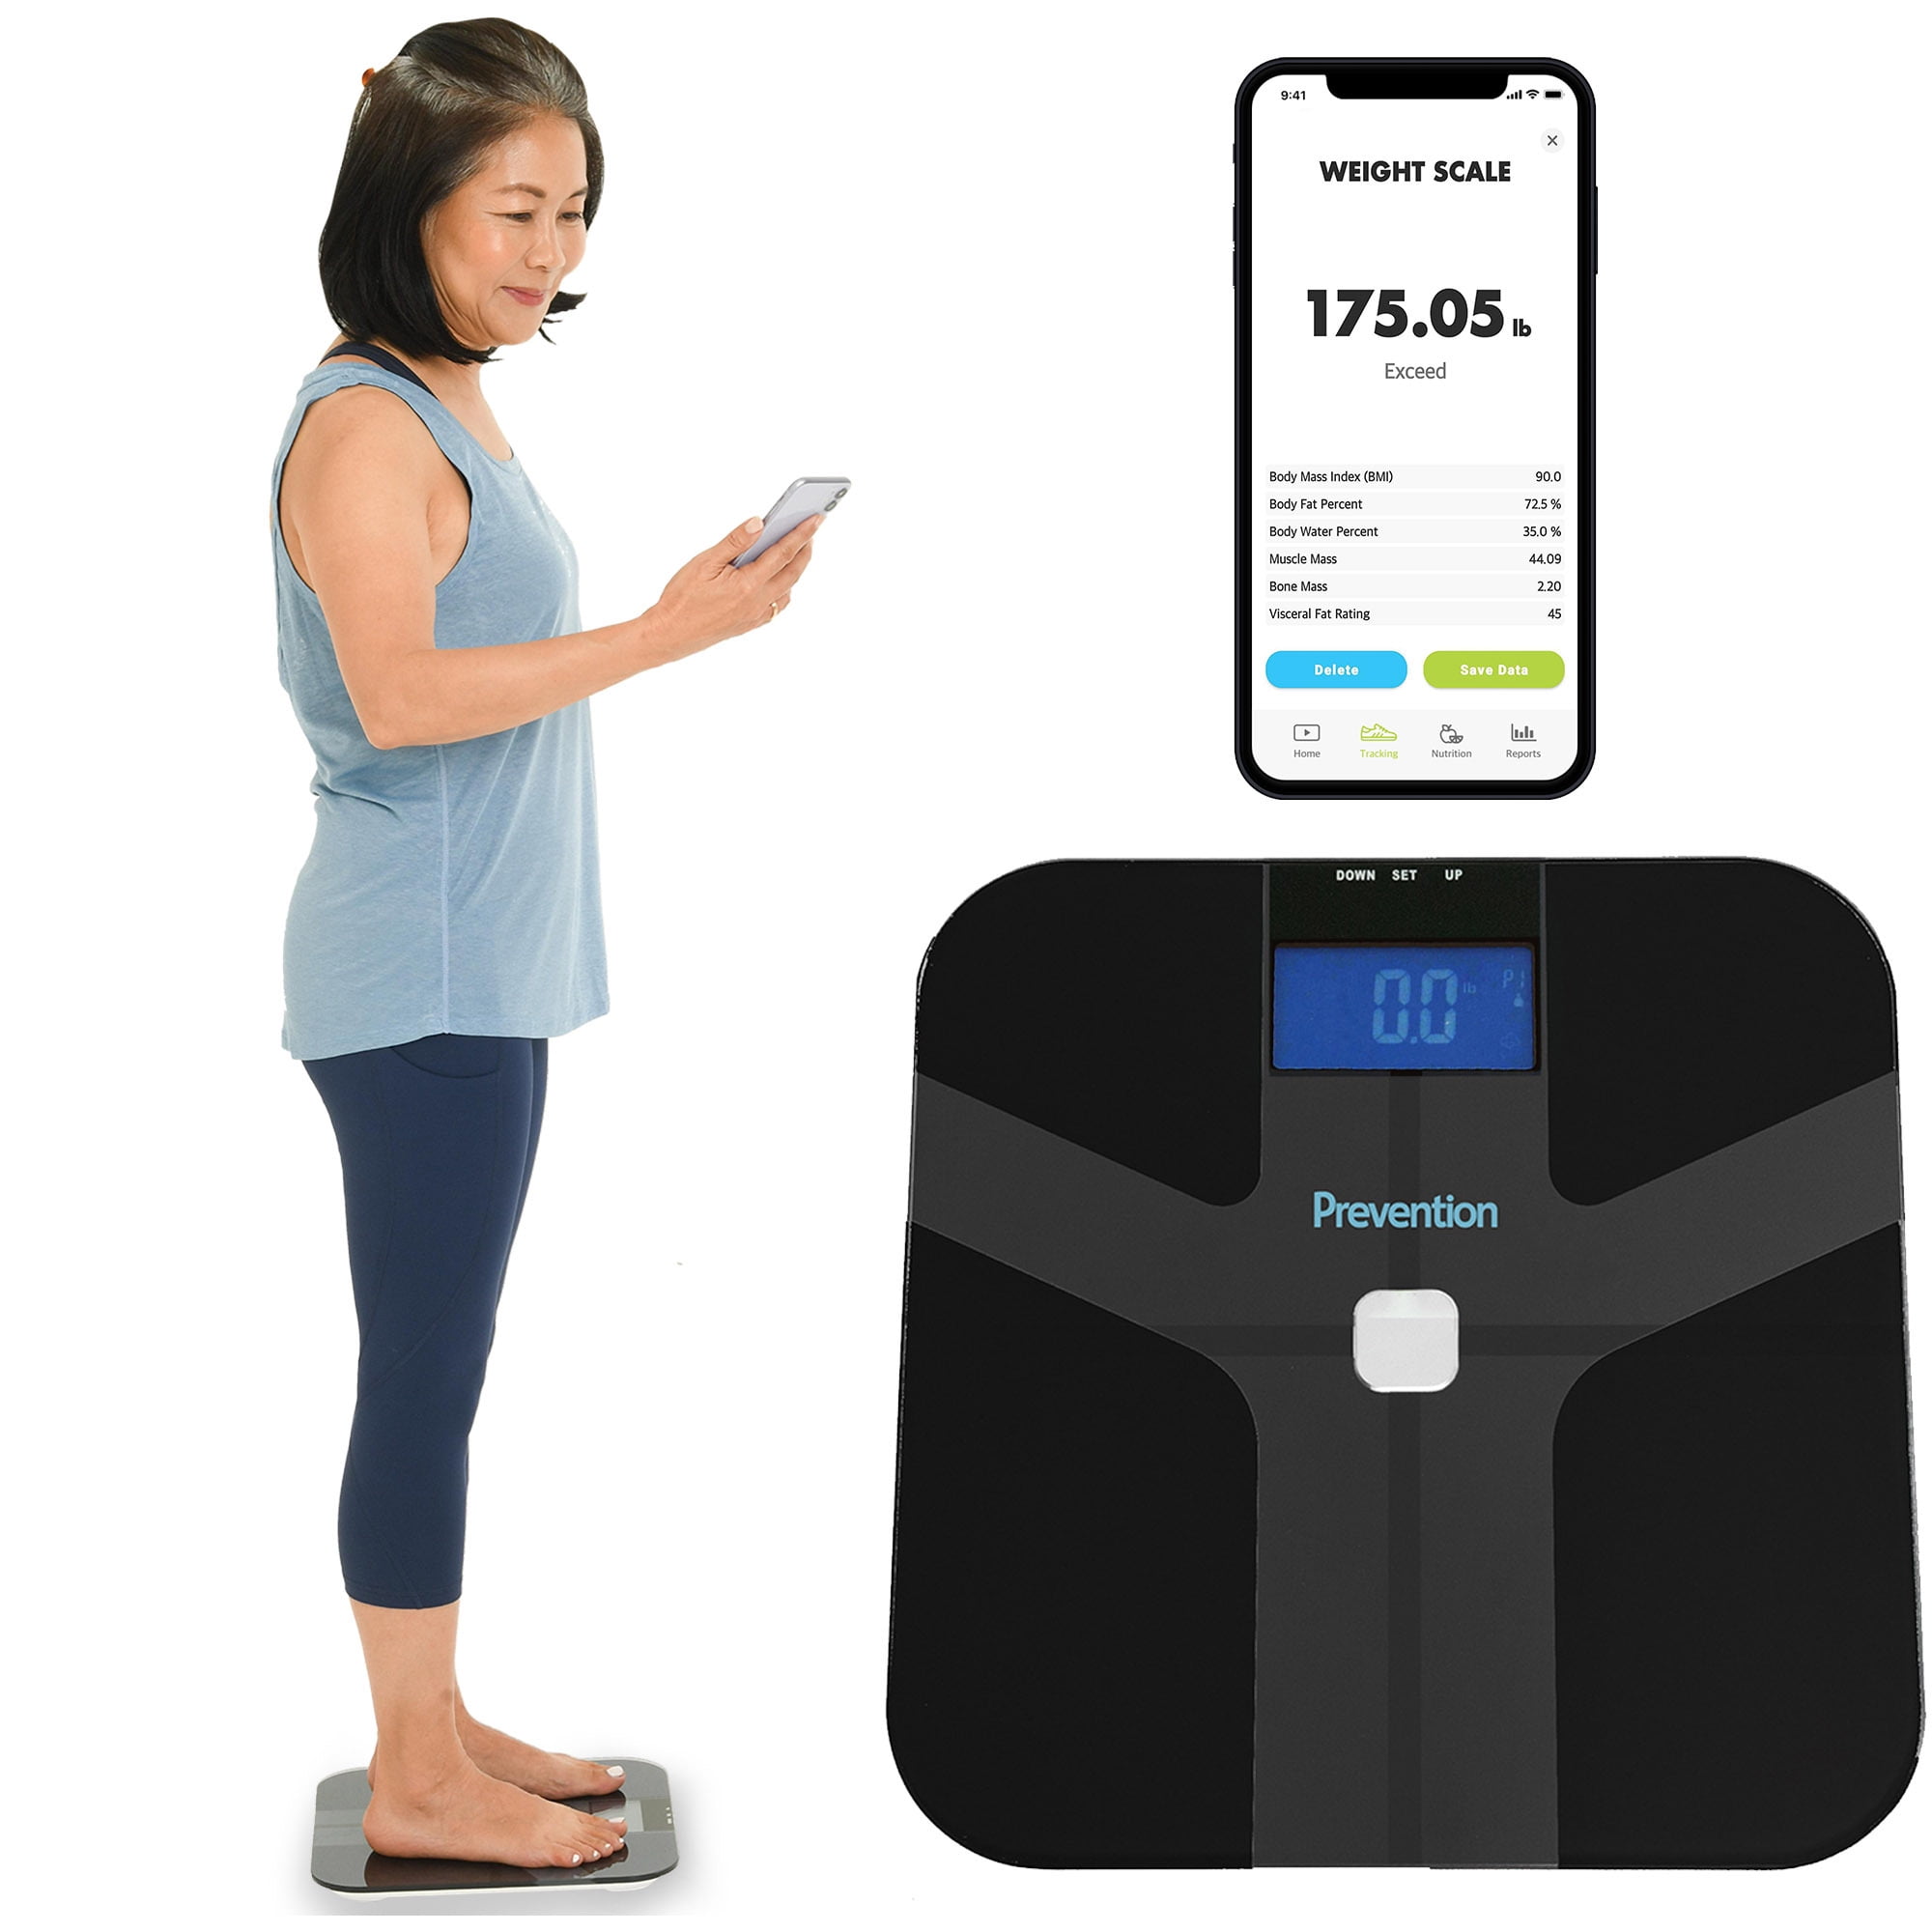 Productlance Personal Body Fat Tester, Body Fat Measurement Device